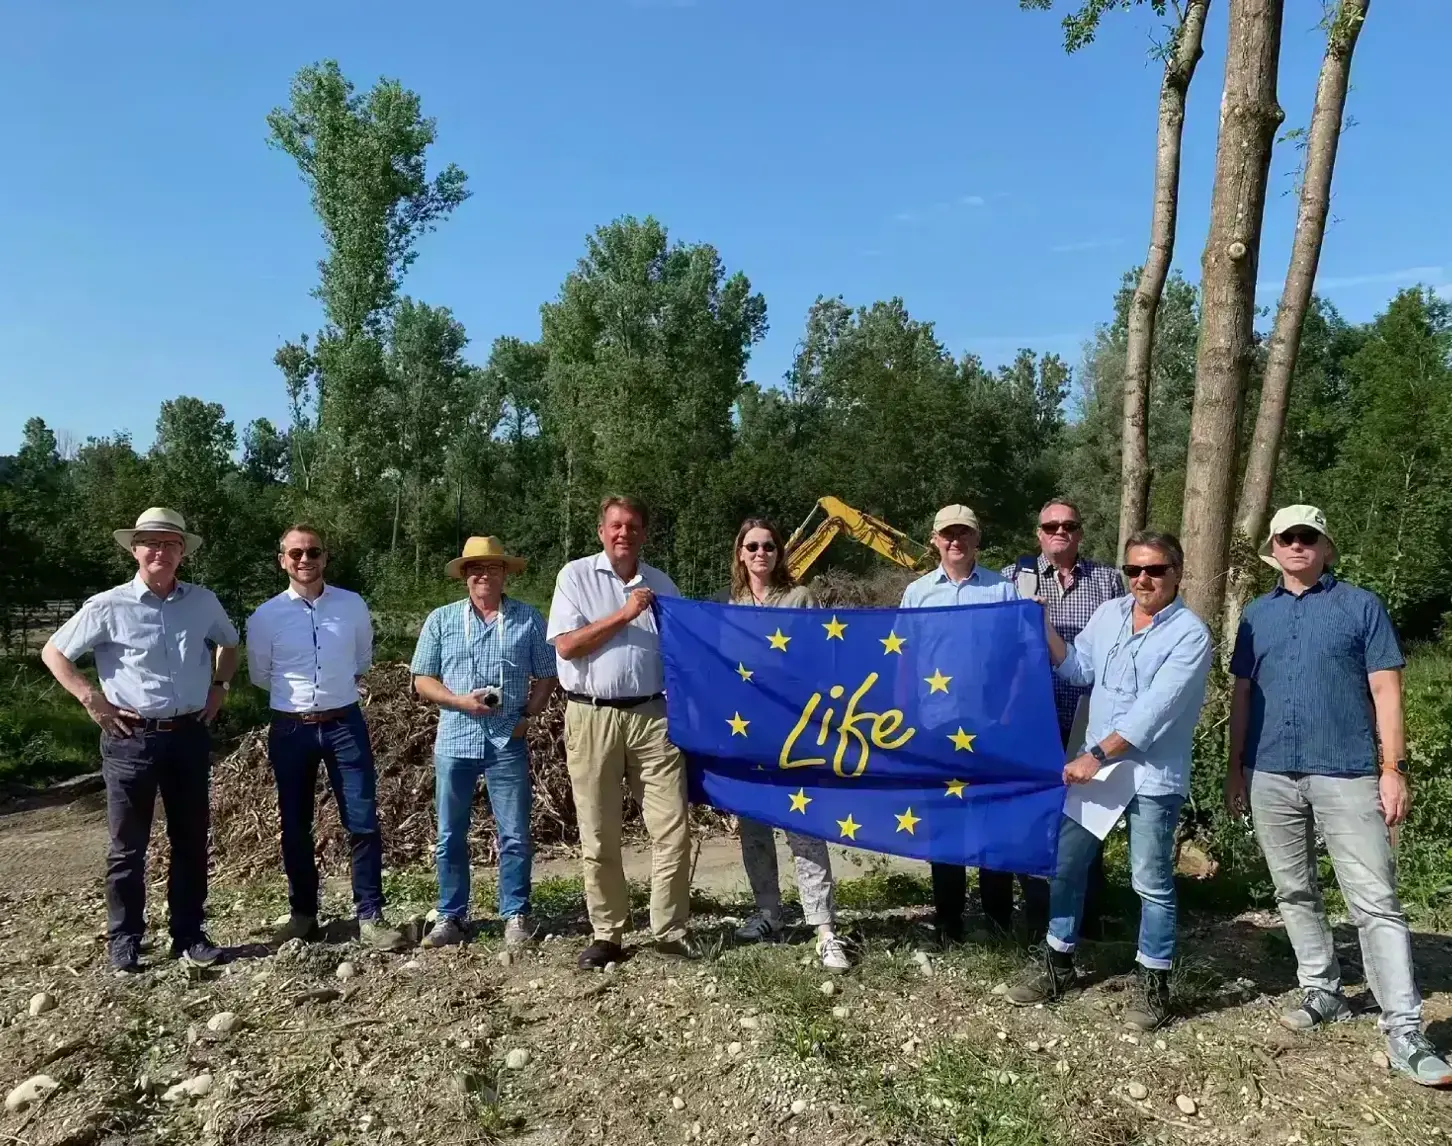 The NEEMO team poses together in the LIFE Blue Belt Danube Inn area. A large flag with the LIFE logo is held up in the centre. In the background is a bright green forest with a bright blue sky above.